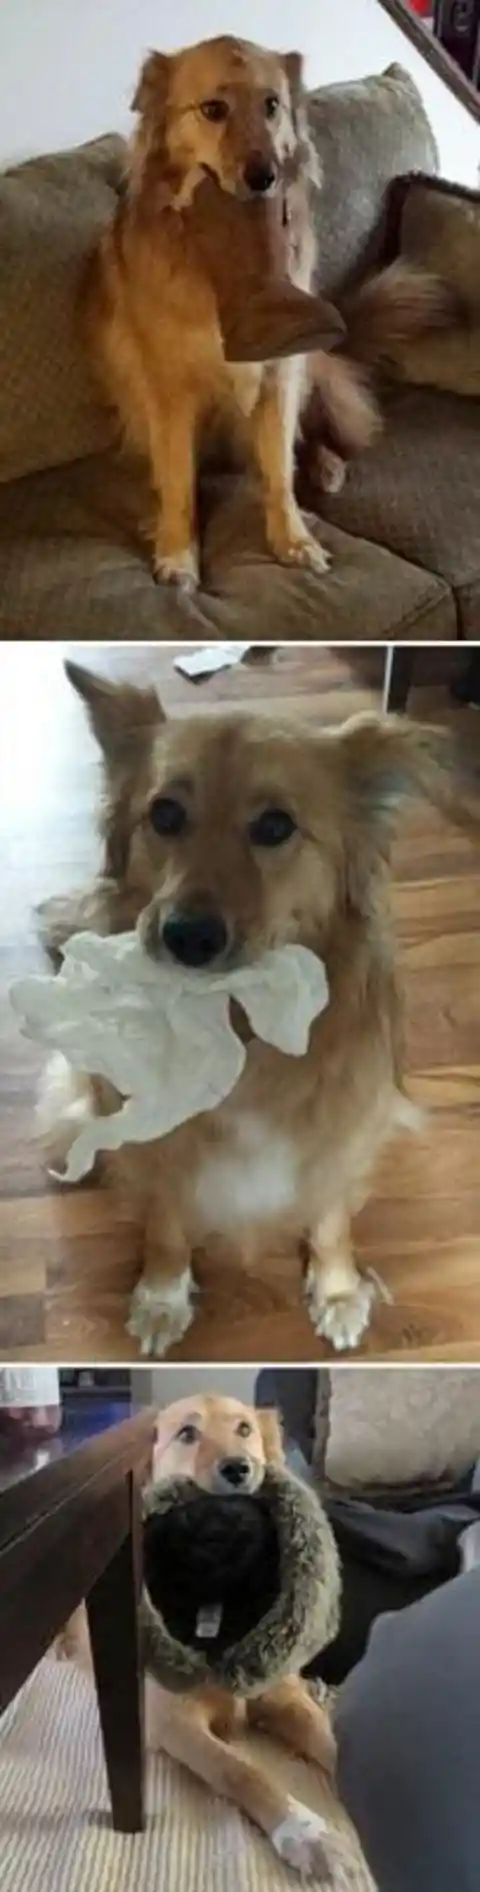 40 Pets Who Surprised Their Humans with Adorable Presents